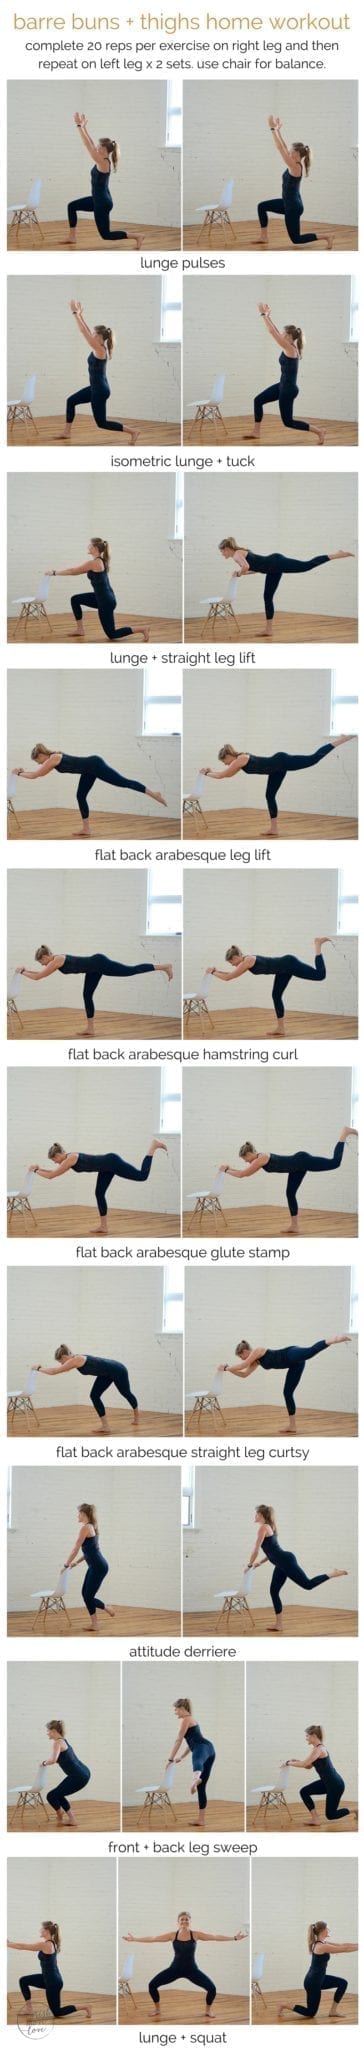 barre buns + thighs home workout | Grab a chair and get ready to tone your derriere with these 10 ballet-inspired moves! | www.nourishmovelove.com